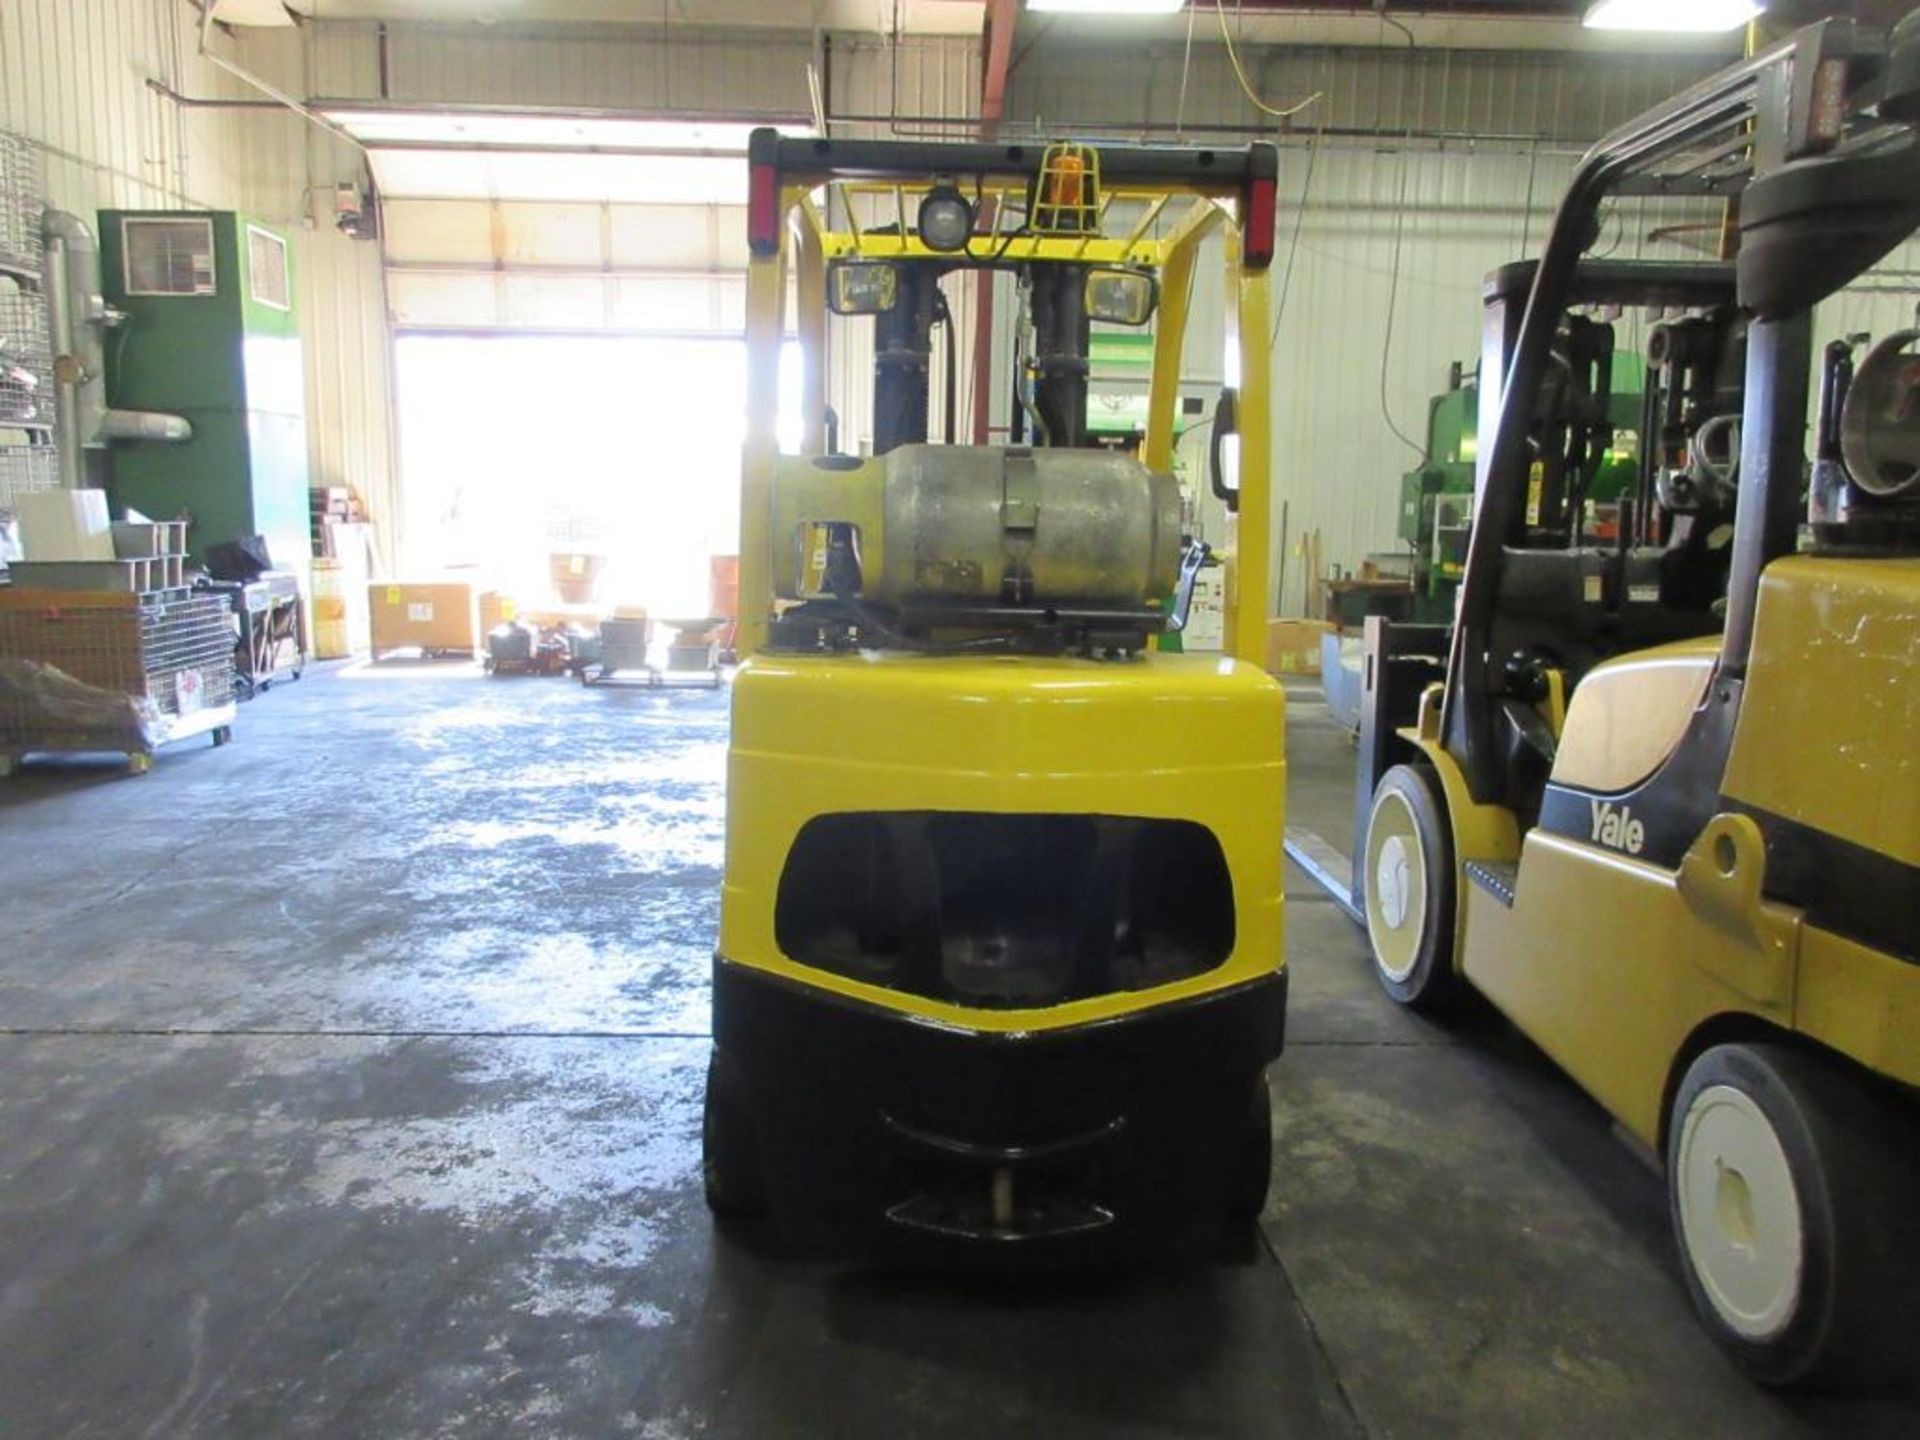 2009 HYSTER 7,000-LB. CAP. LPG FORKLIFT, 3-STAGE MAST, 187 IN. MAX. LOAD HT., CUSHION TIRES, LEVER - Image 4 of 6